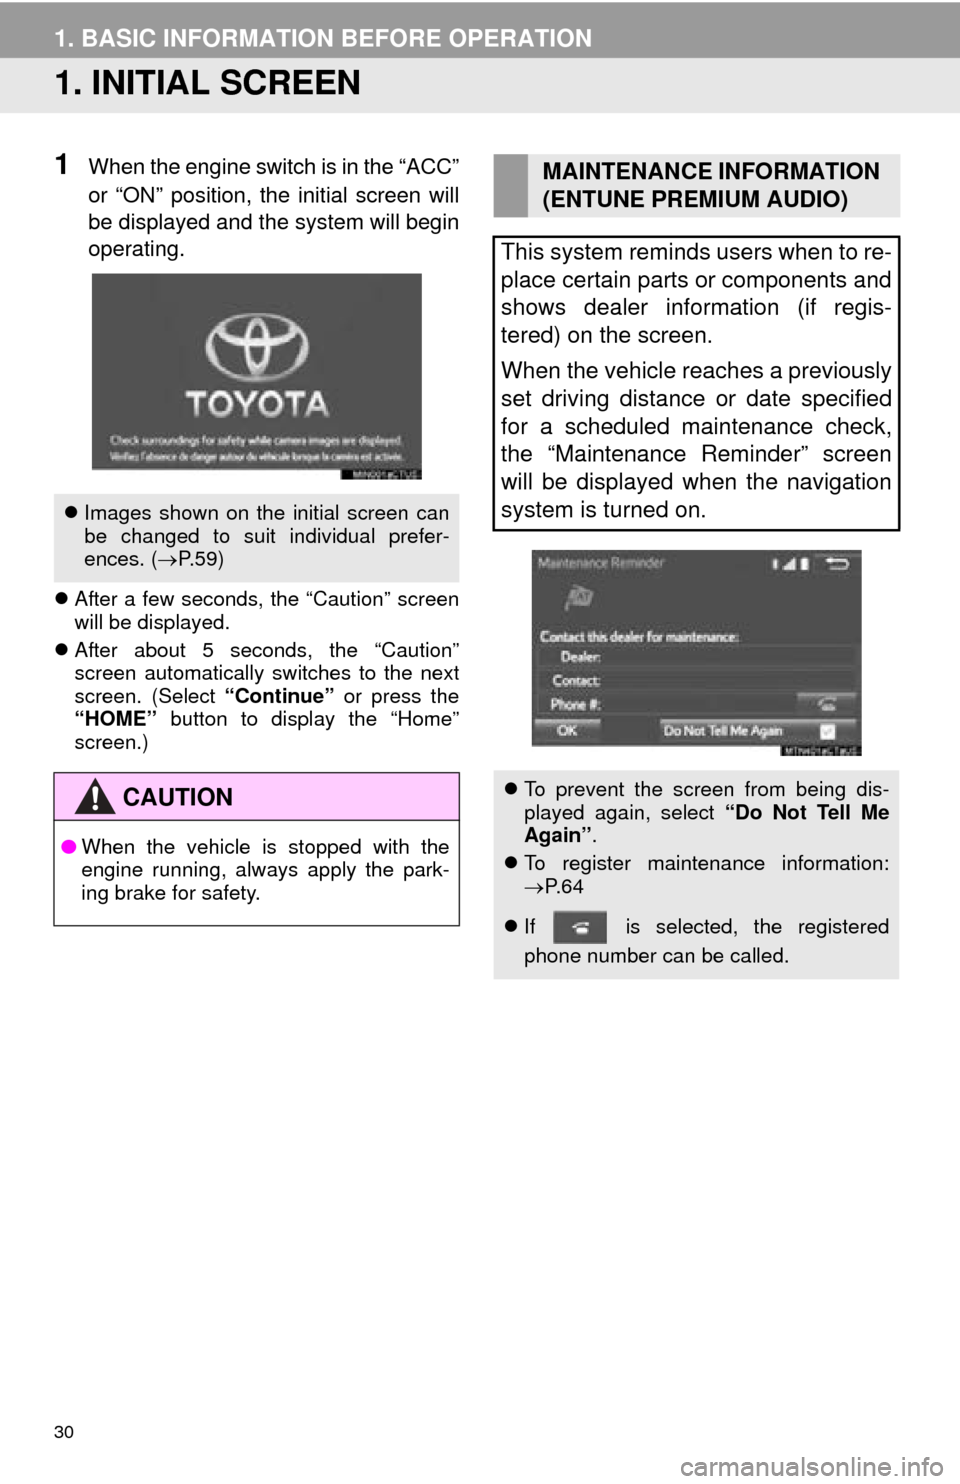 TOYOTA TUNDRA 2016 2.G Navigation Manual 30
1. BASIC INFORMATION BEFORE OPERATION
1. INITIAL SCREEN
1When the engine switch is in the “ACC” 
or “ON” position, the initial screen will 
be displayed and the system will begin 
operating